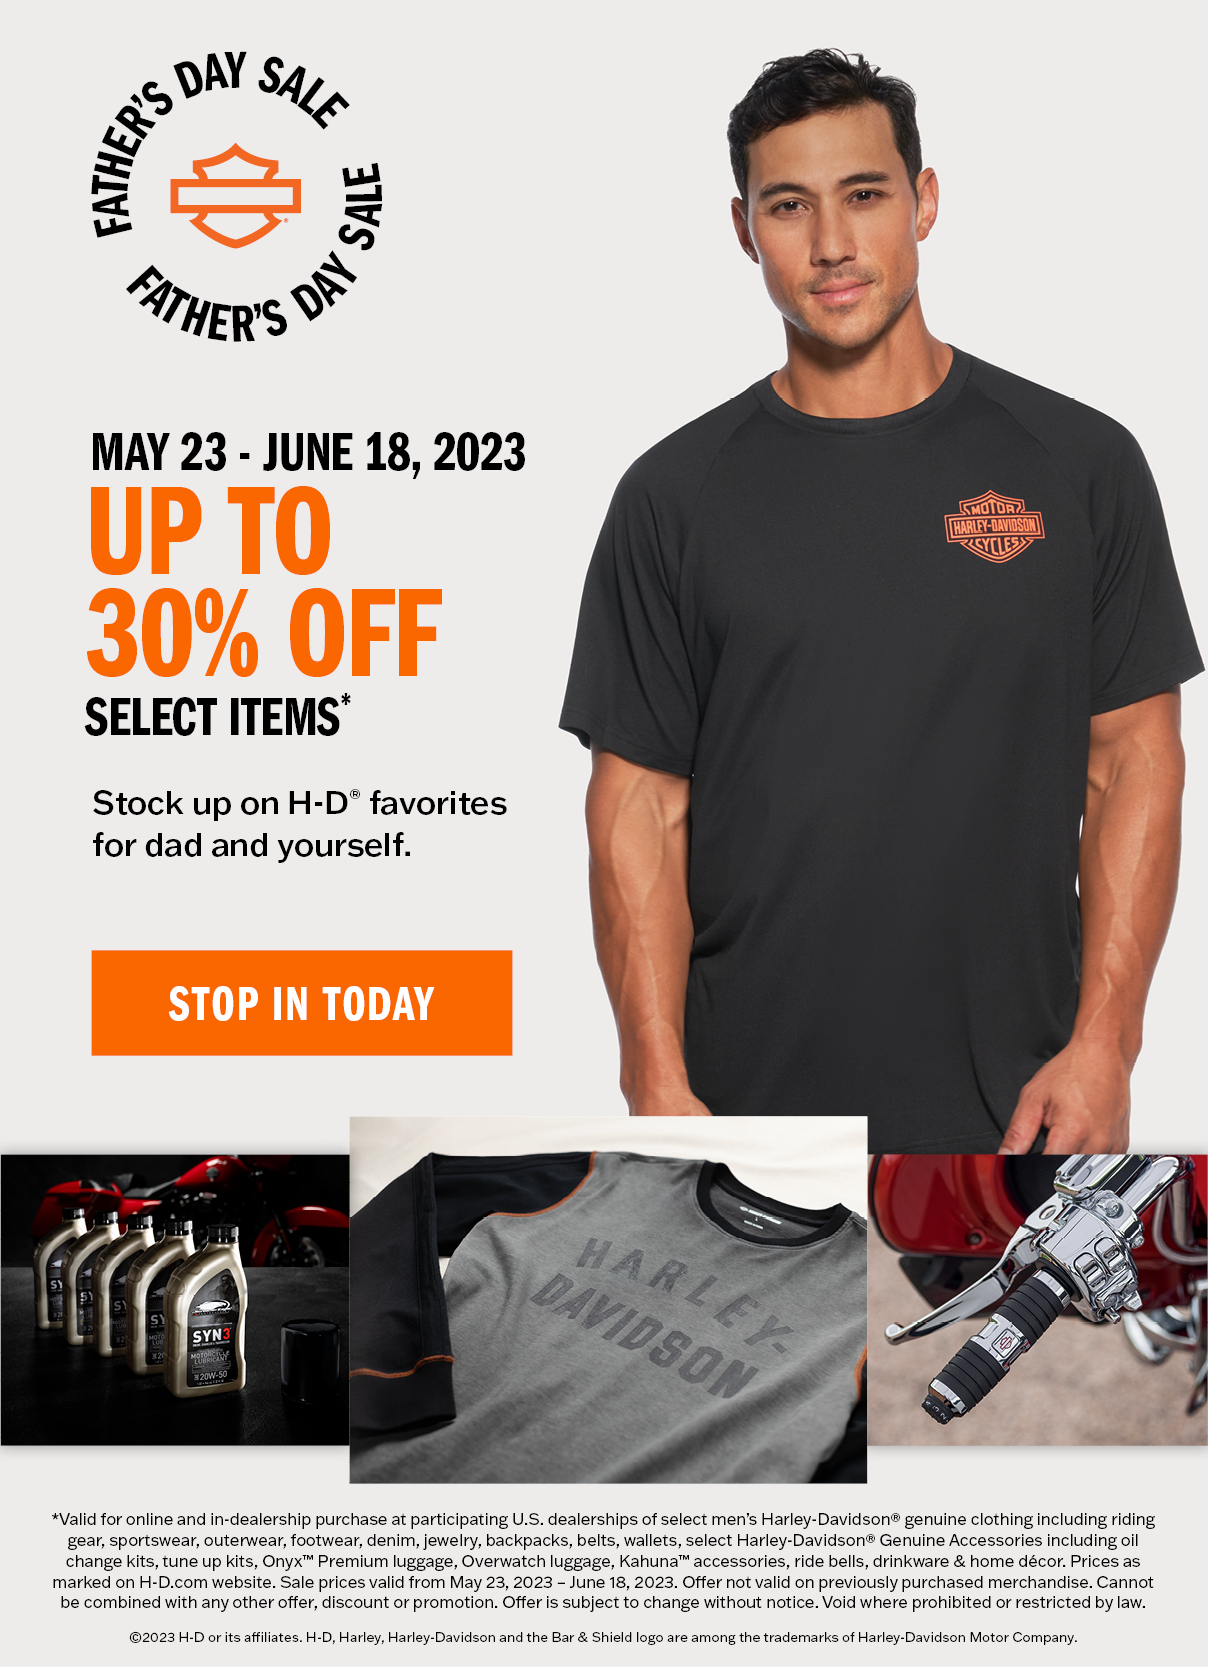 father_s-day-sale-primary-email-2